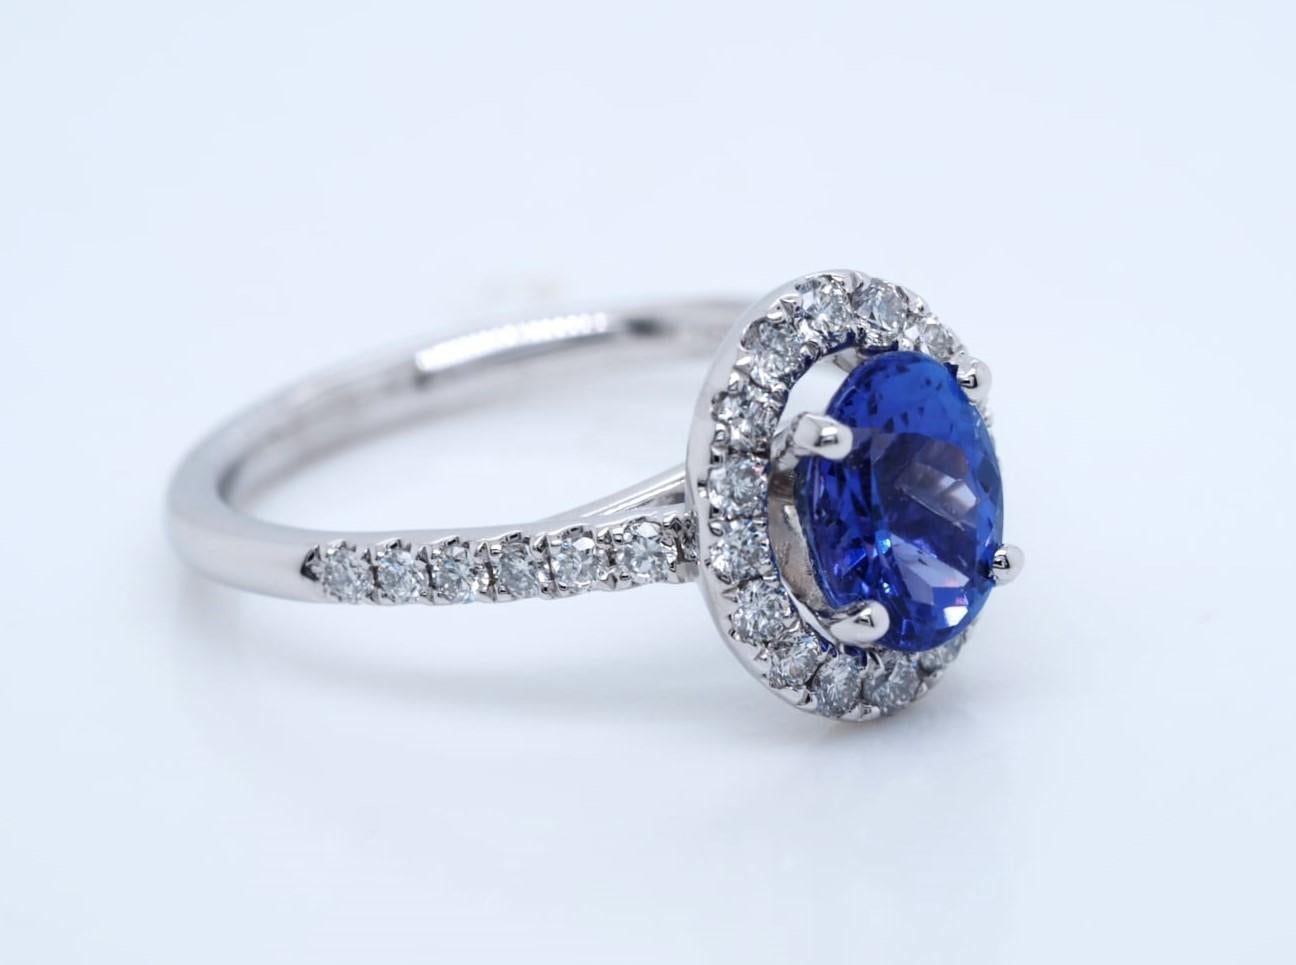 Number of Diamonds  28
Main Stone Color Blue
Secondary Stone  Diamond
Main Stone  Tanzanite
Ring Size 7
Main Stone Shape  Oval
Style  Halo Ring
Base Metal  Platinum
Gemstone Clarity Grade  Eye Clean
Number of Gemstones  1
Sizable  Yes
Total Carat